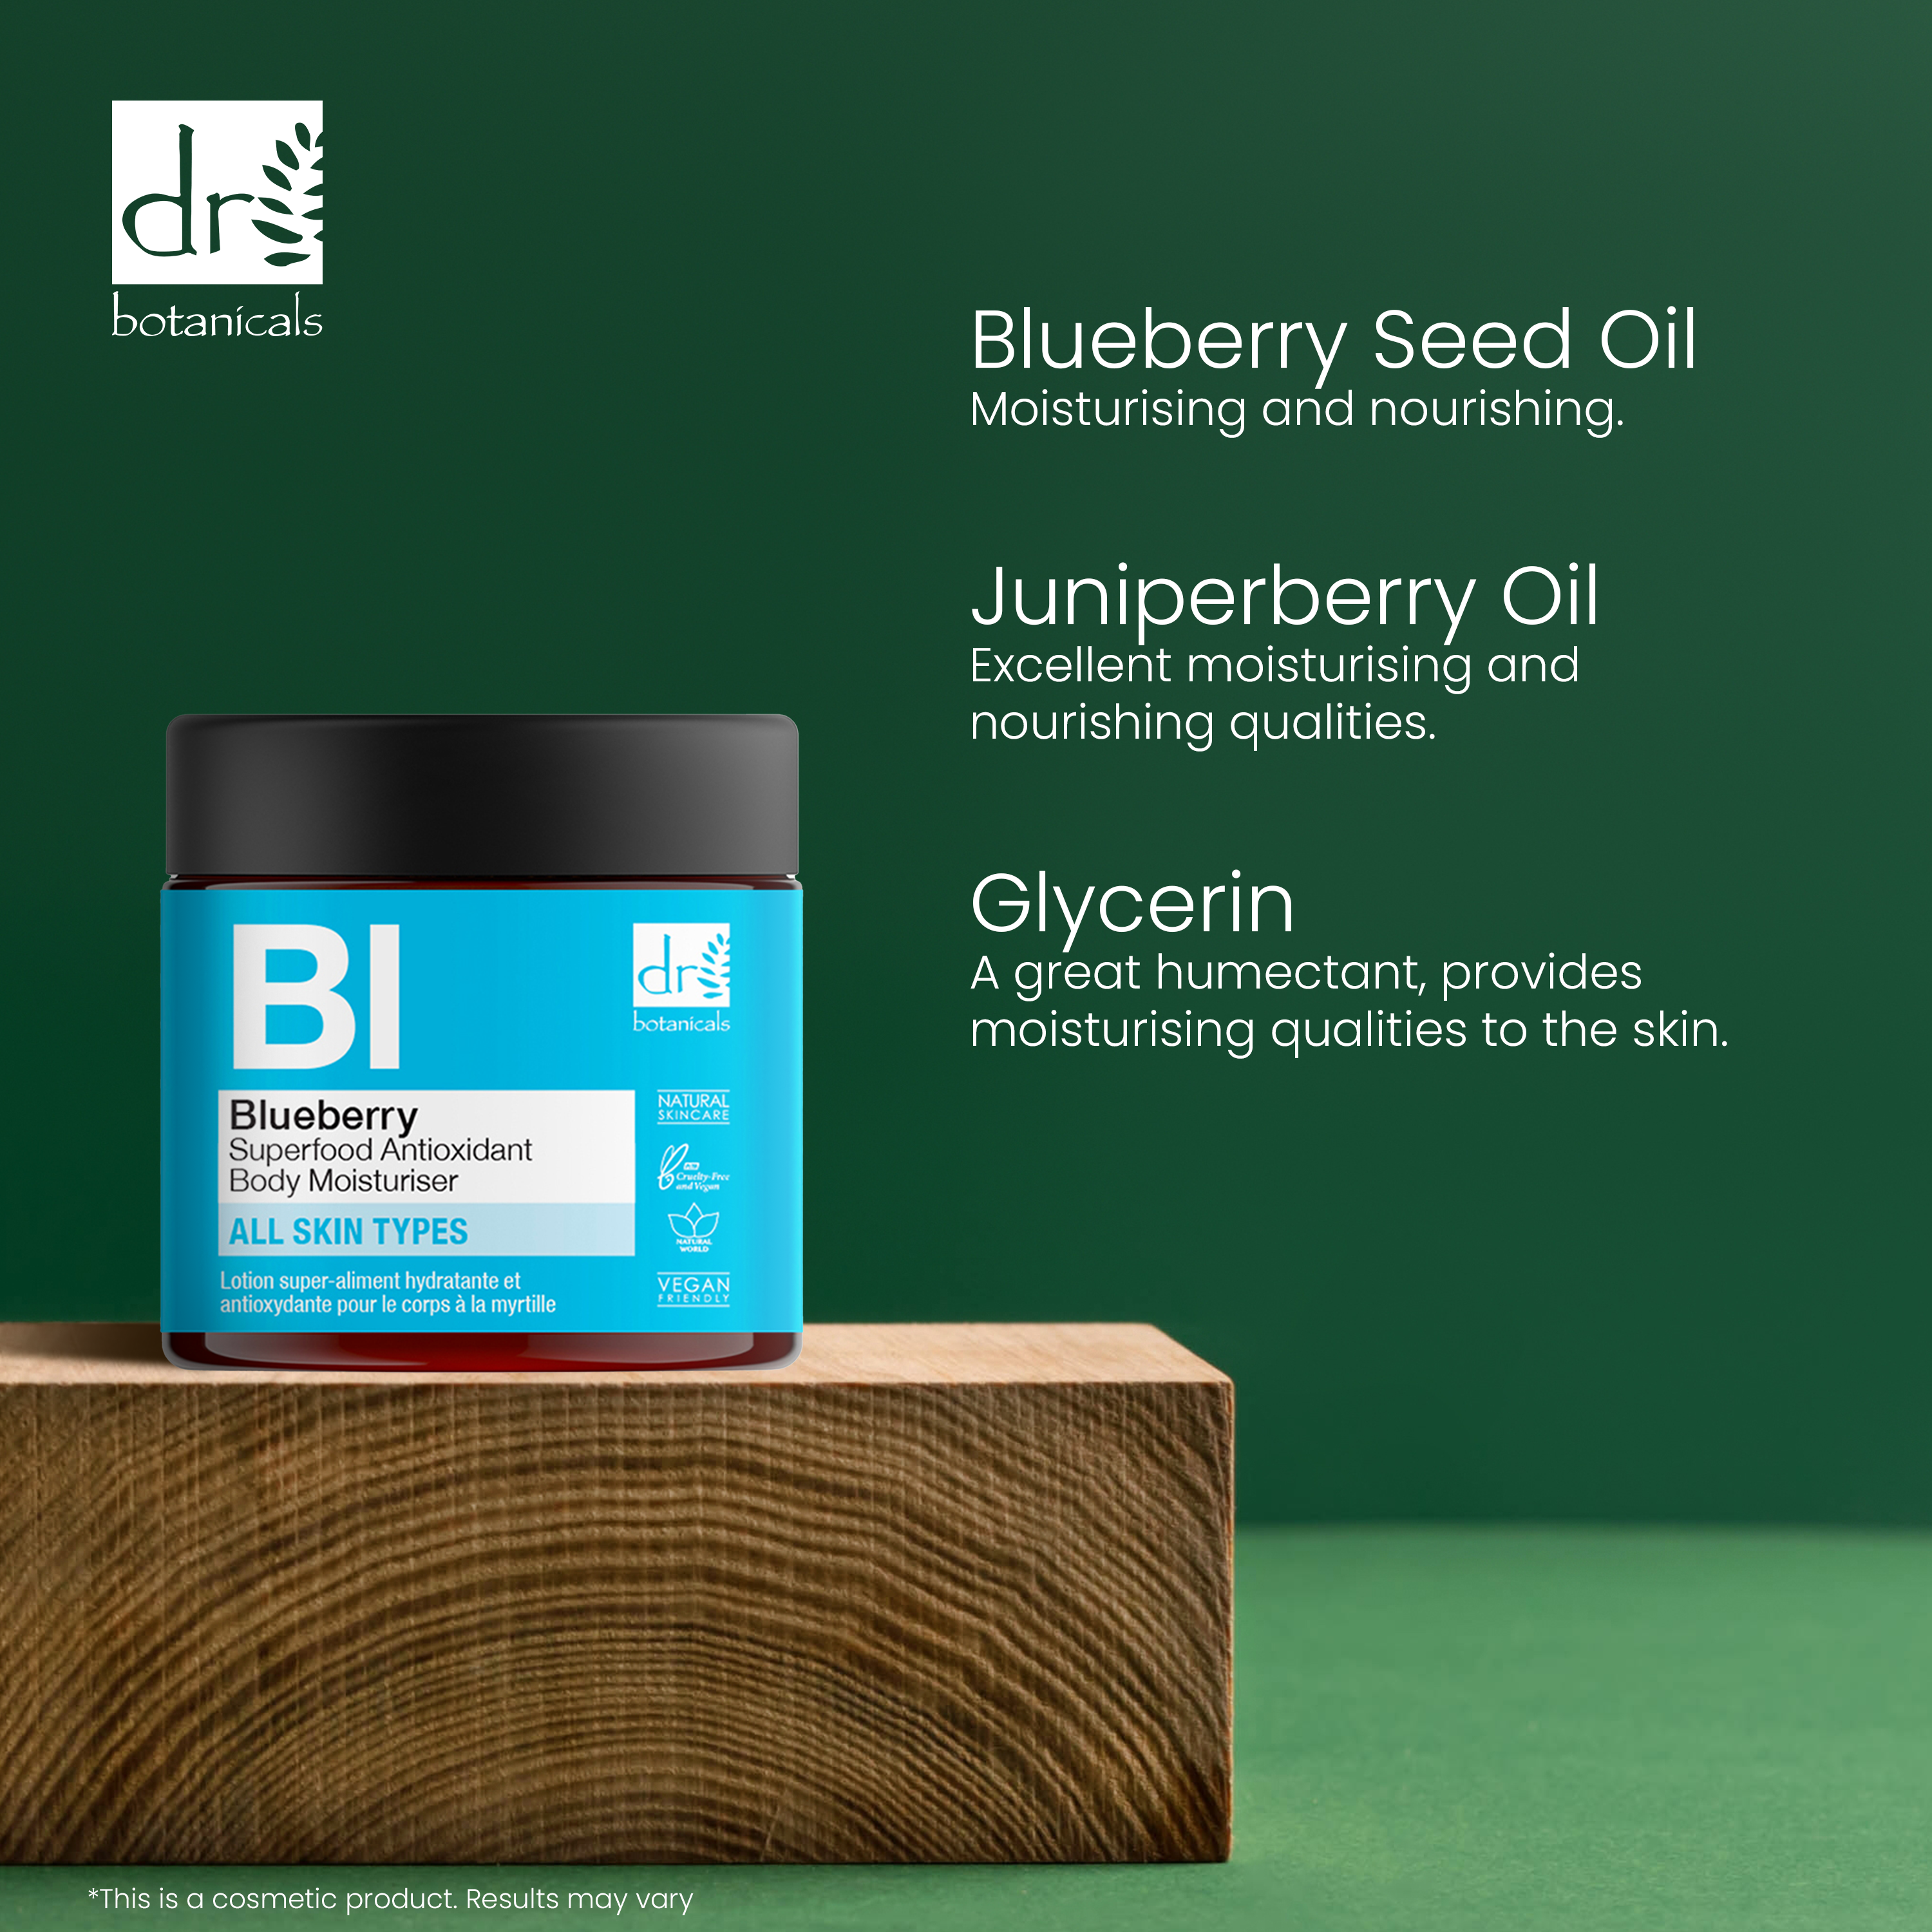 Blueberry Superfood Hydratant antioxydant pour le corps 60 ml 